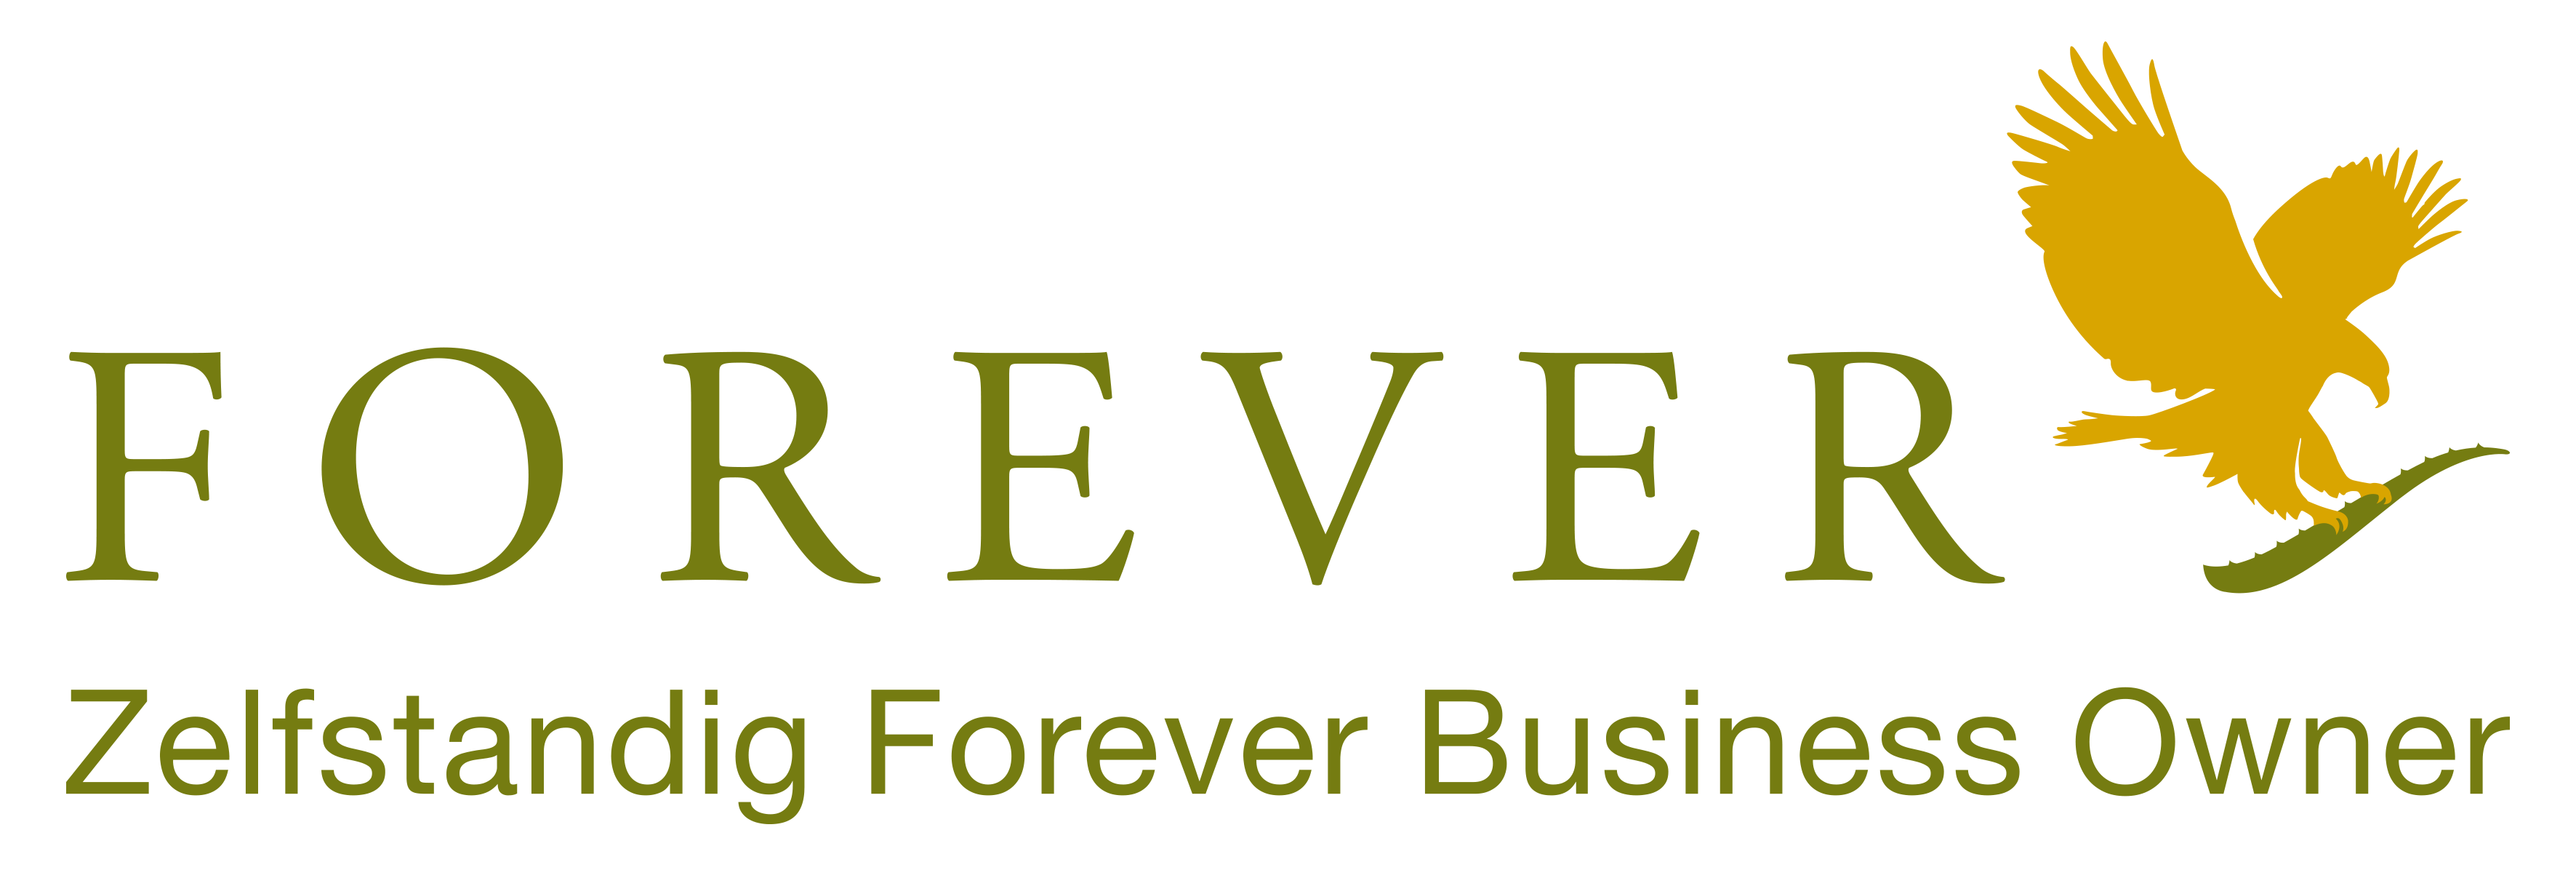 Forever Aloe vera supplies Forever products to customers in Benelus and France as an Independent Business Owner for Forever Living. Buy your Forever Living products in Belgium, the Netherlands, Luxembourg and France